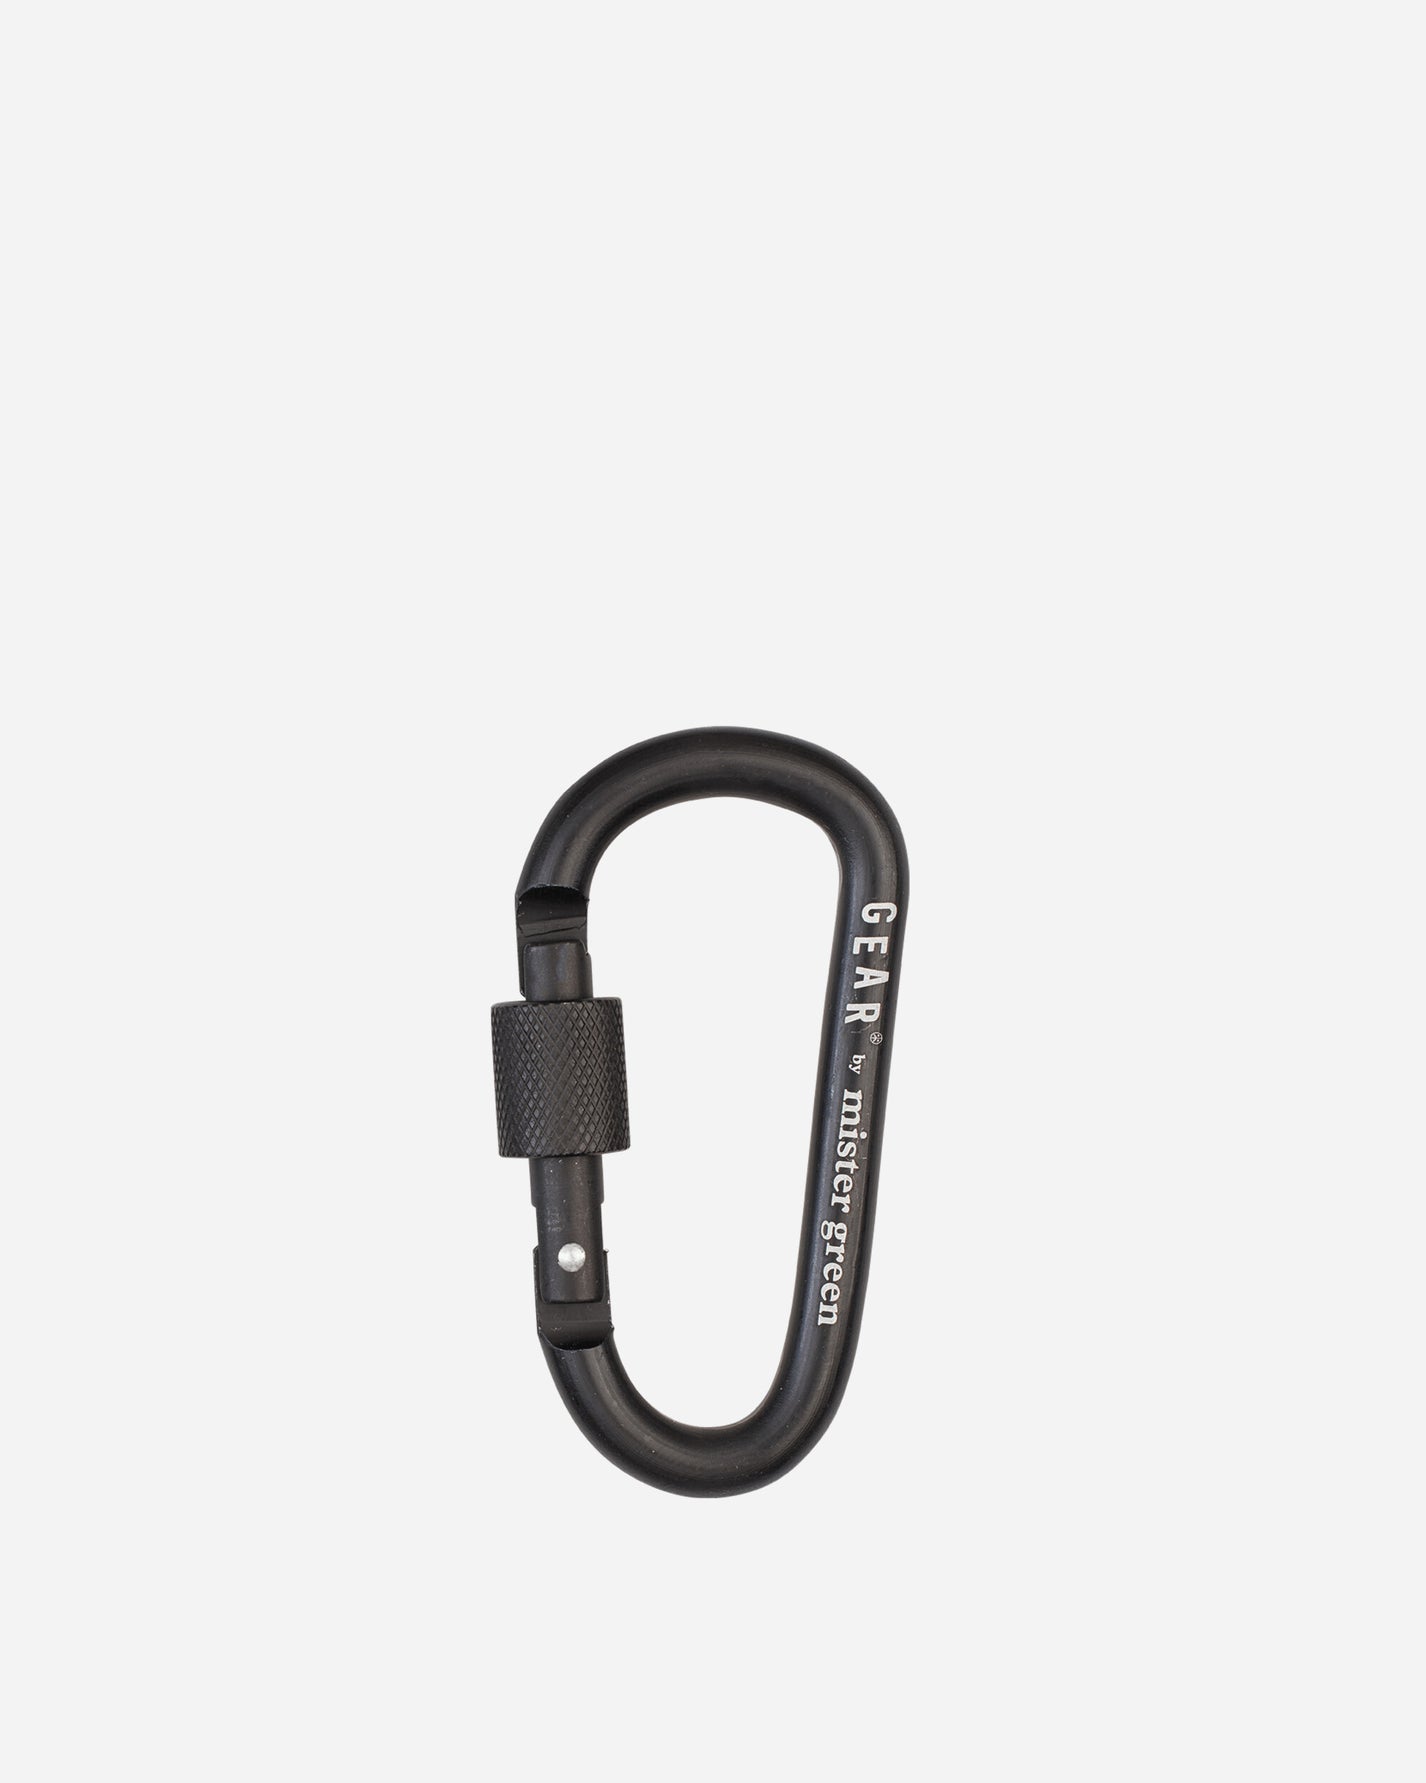 Mister Green Gear Carabiner Black Small Accessories Keychains MG-X1159 BLK